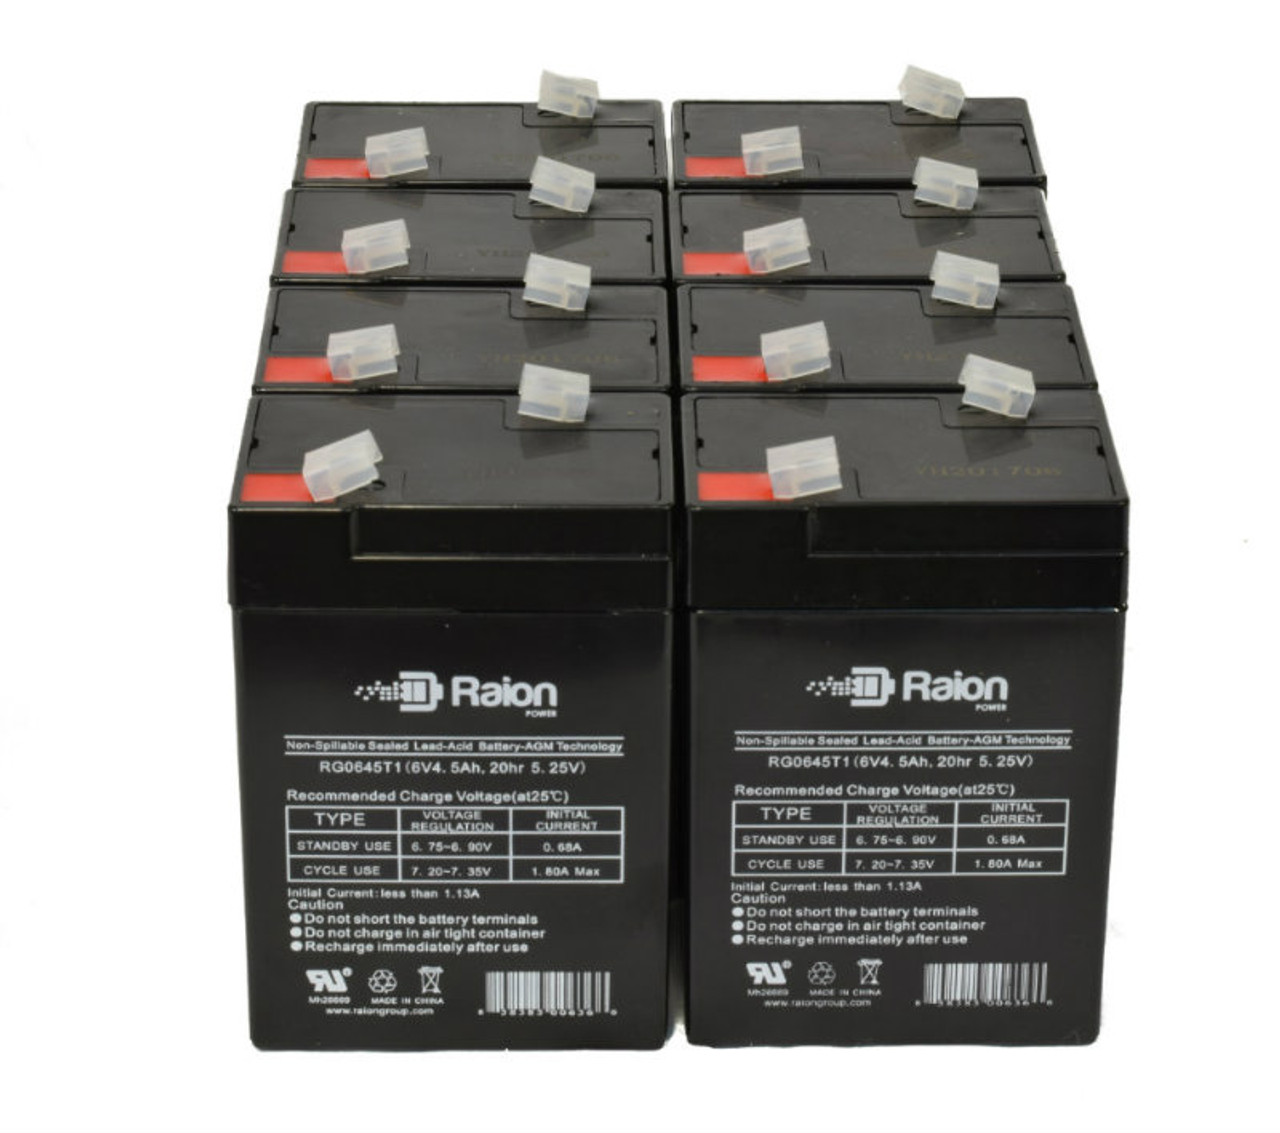 Raion Power 6V 4.5Ah Replacement Emergency Light Battery for Sure-Lites 2602 - 8 Pack